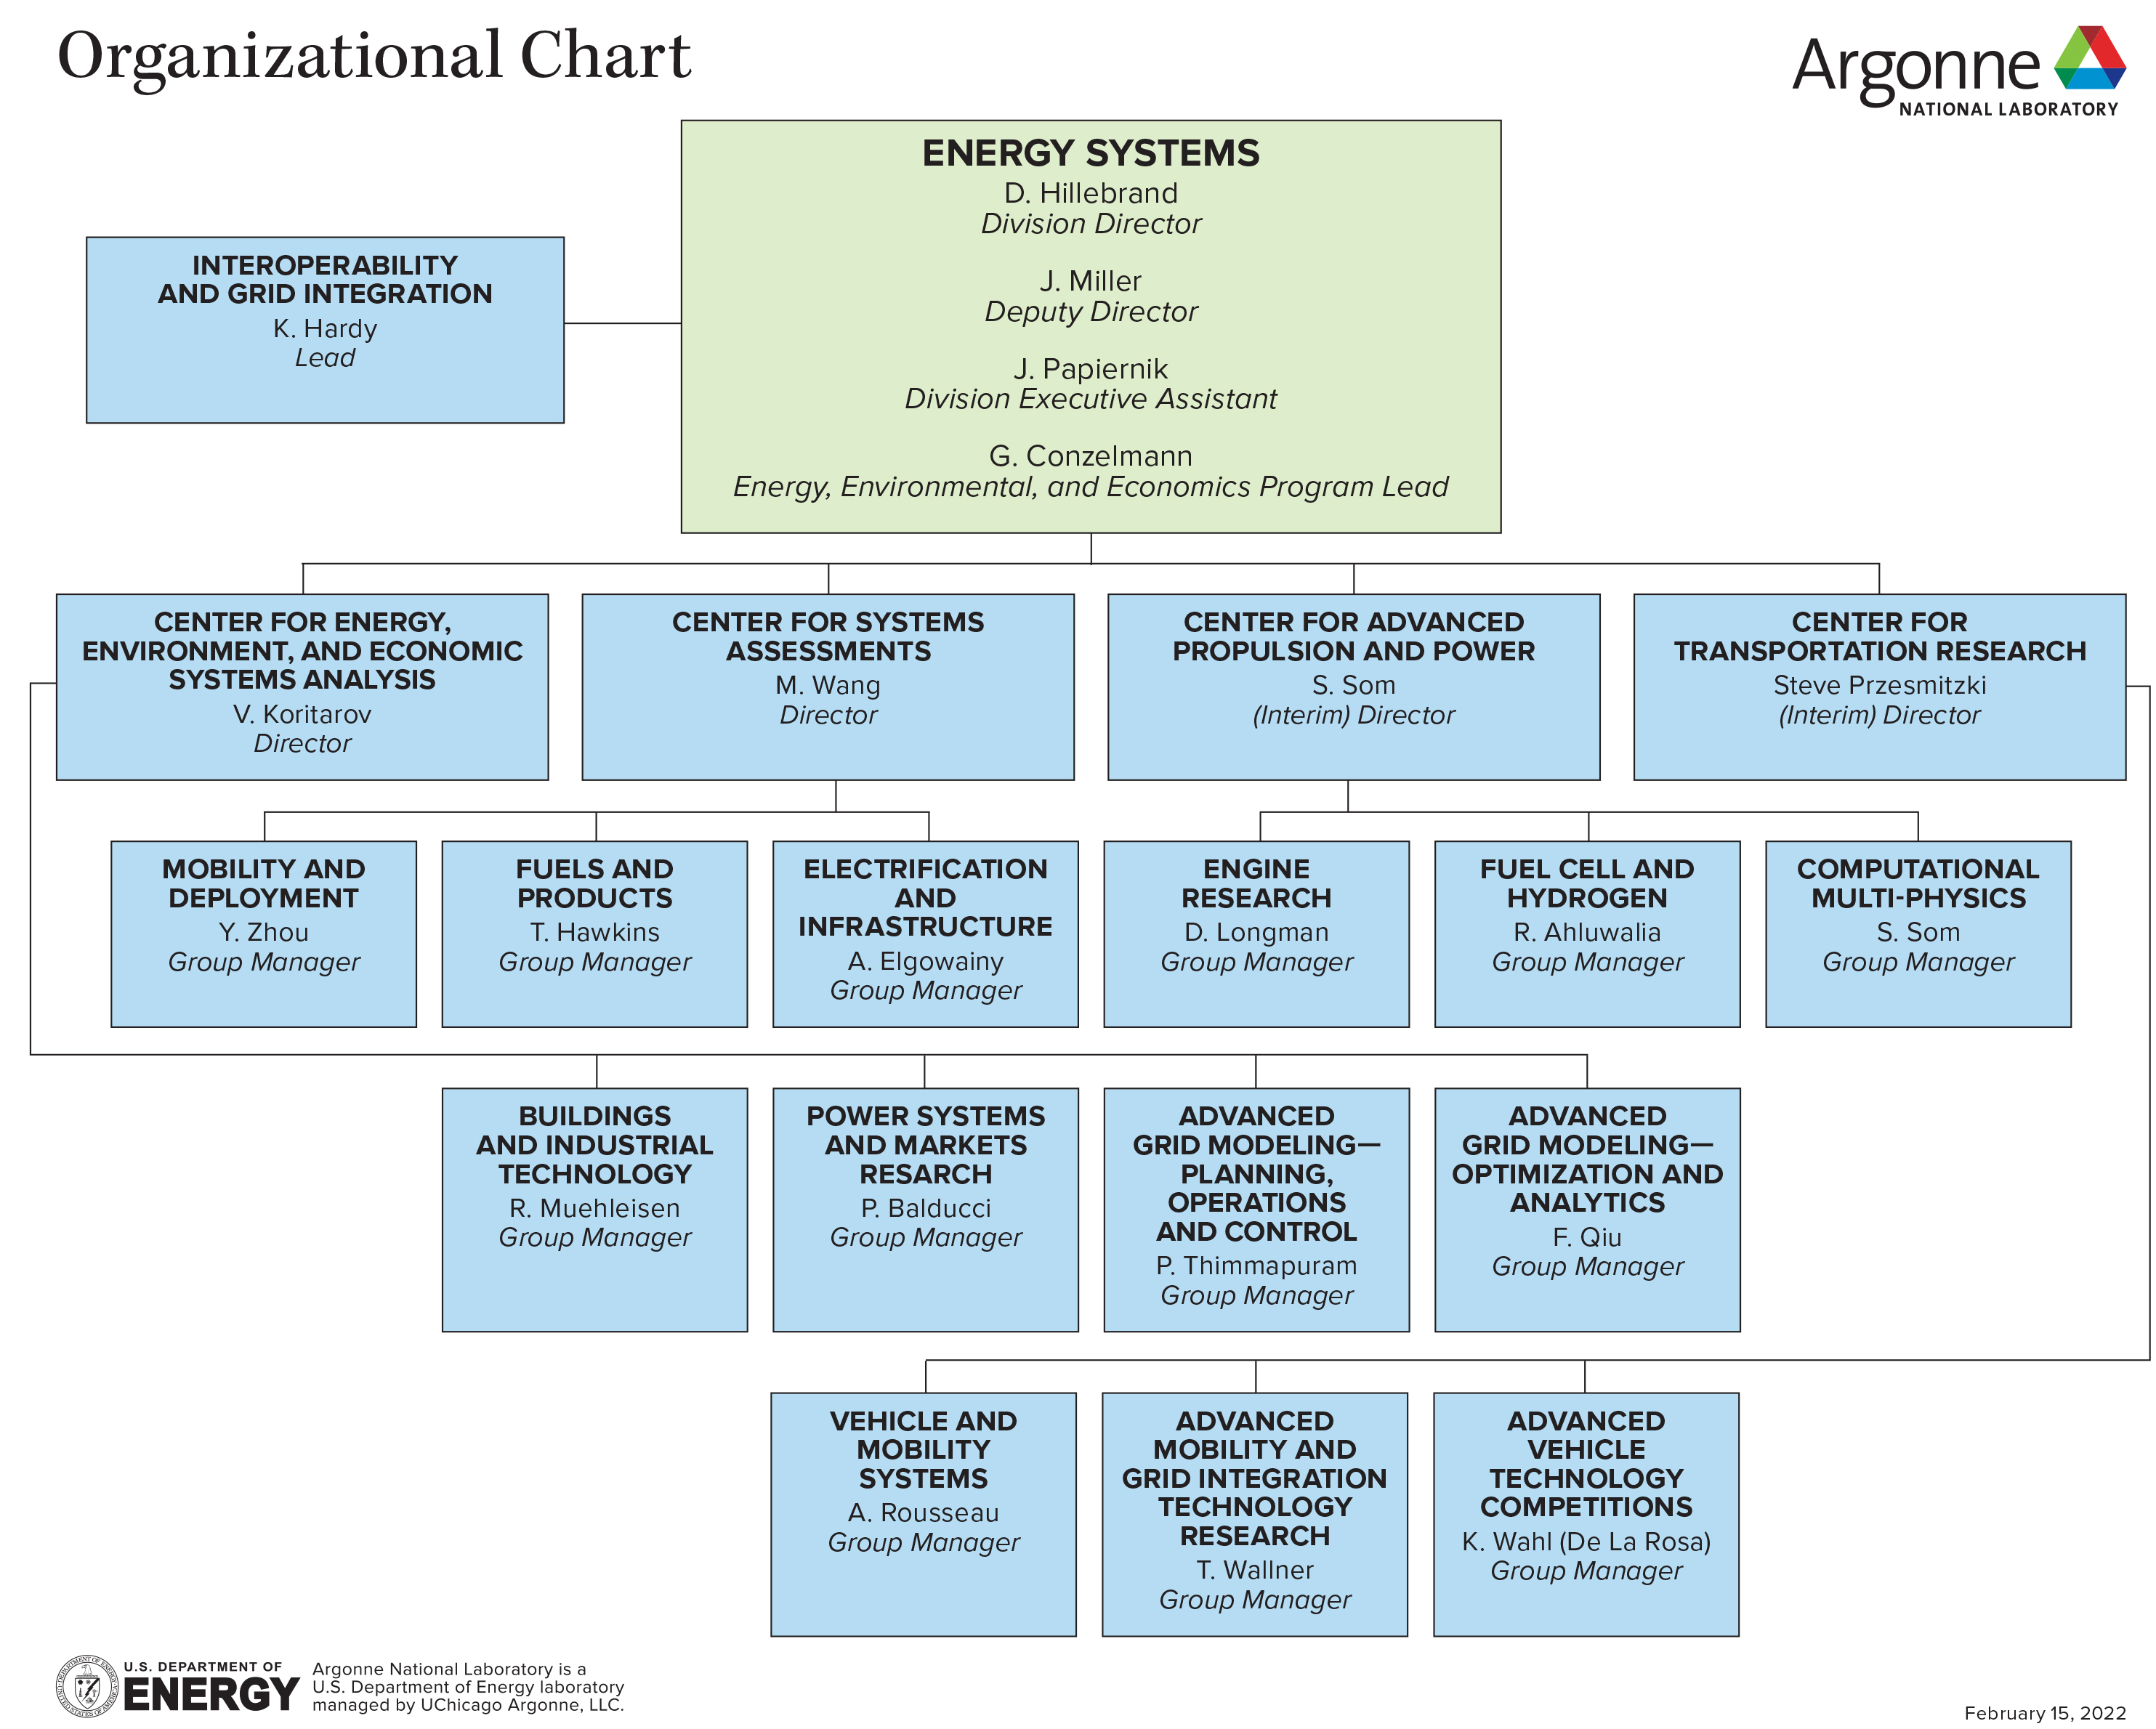 Organization chart of the Argonne Energy Systems division